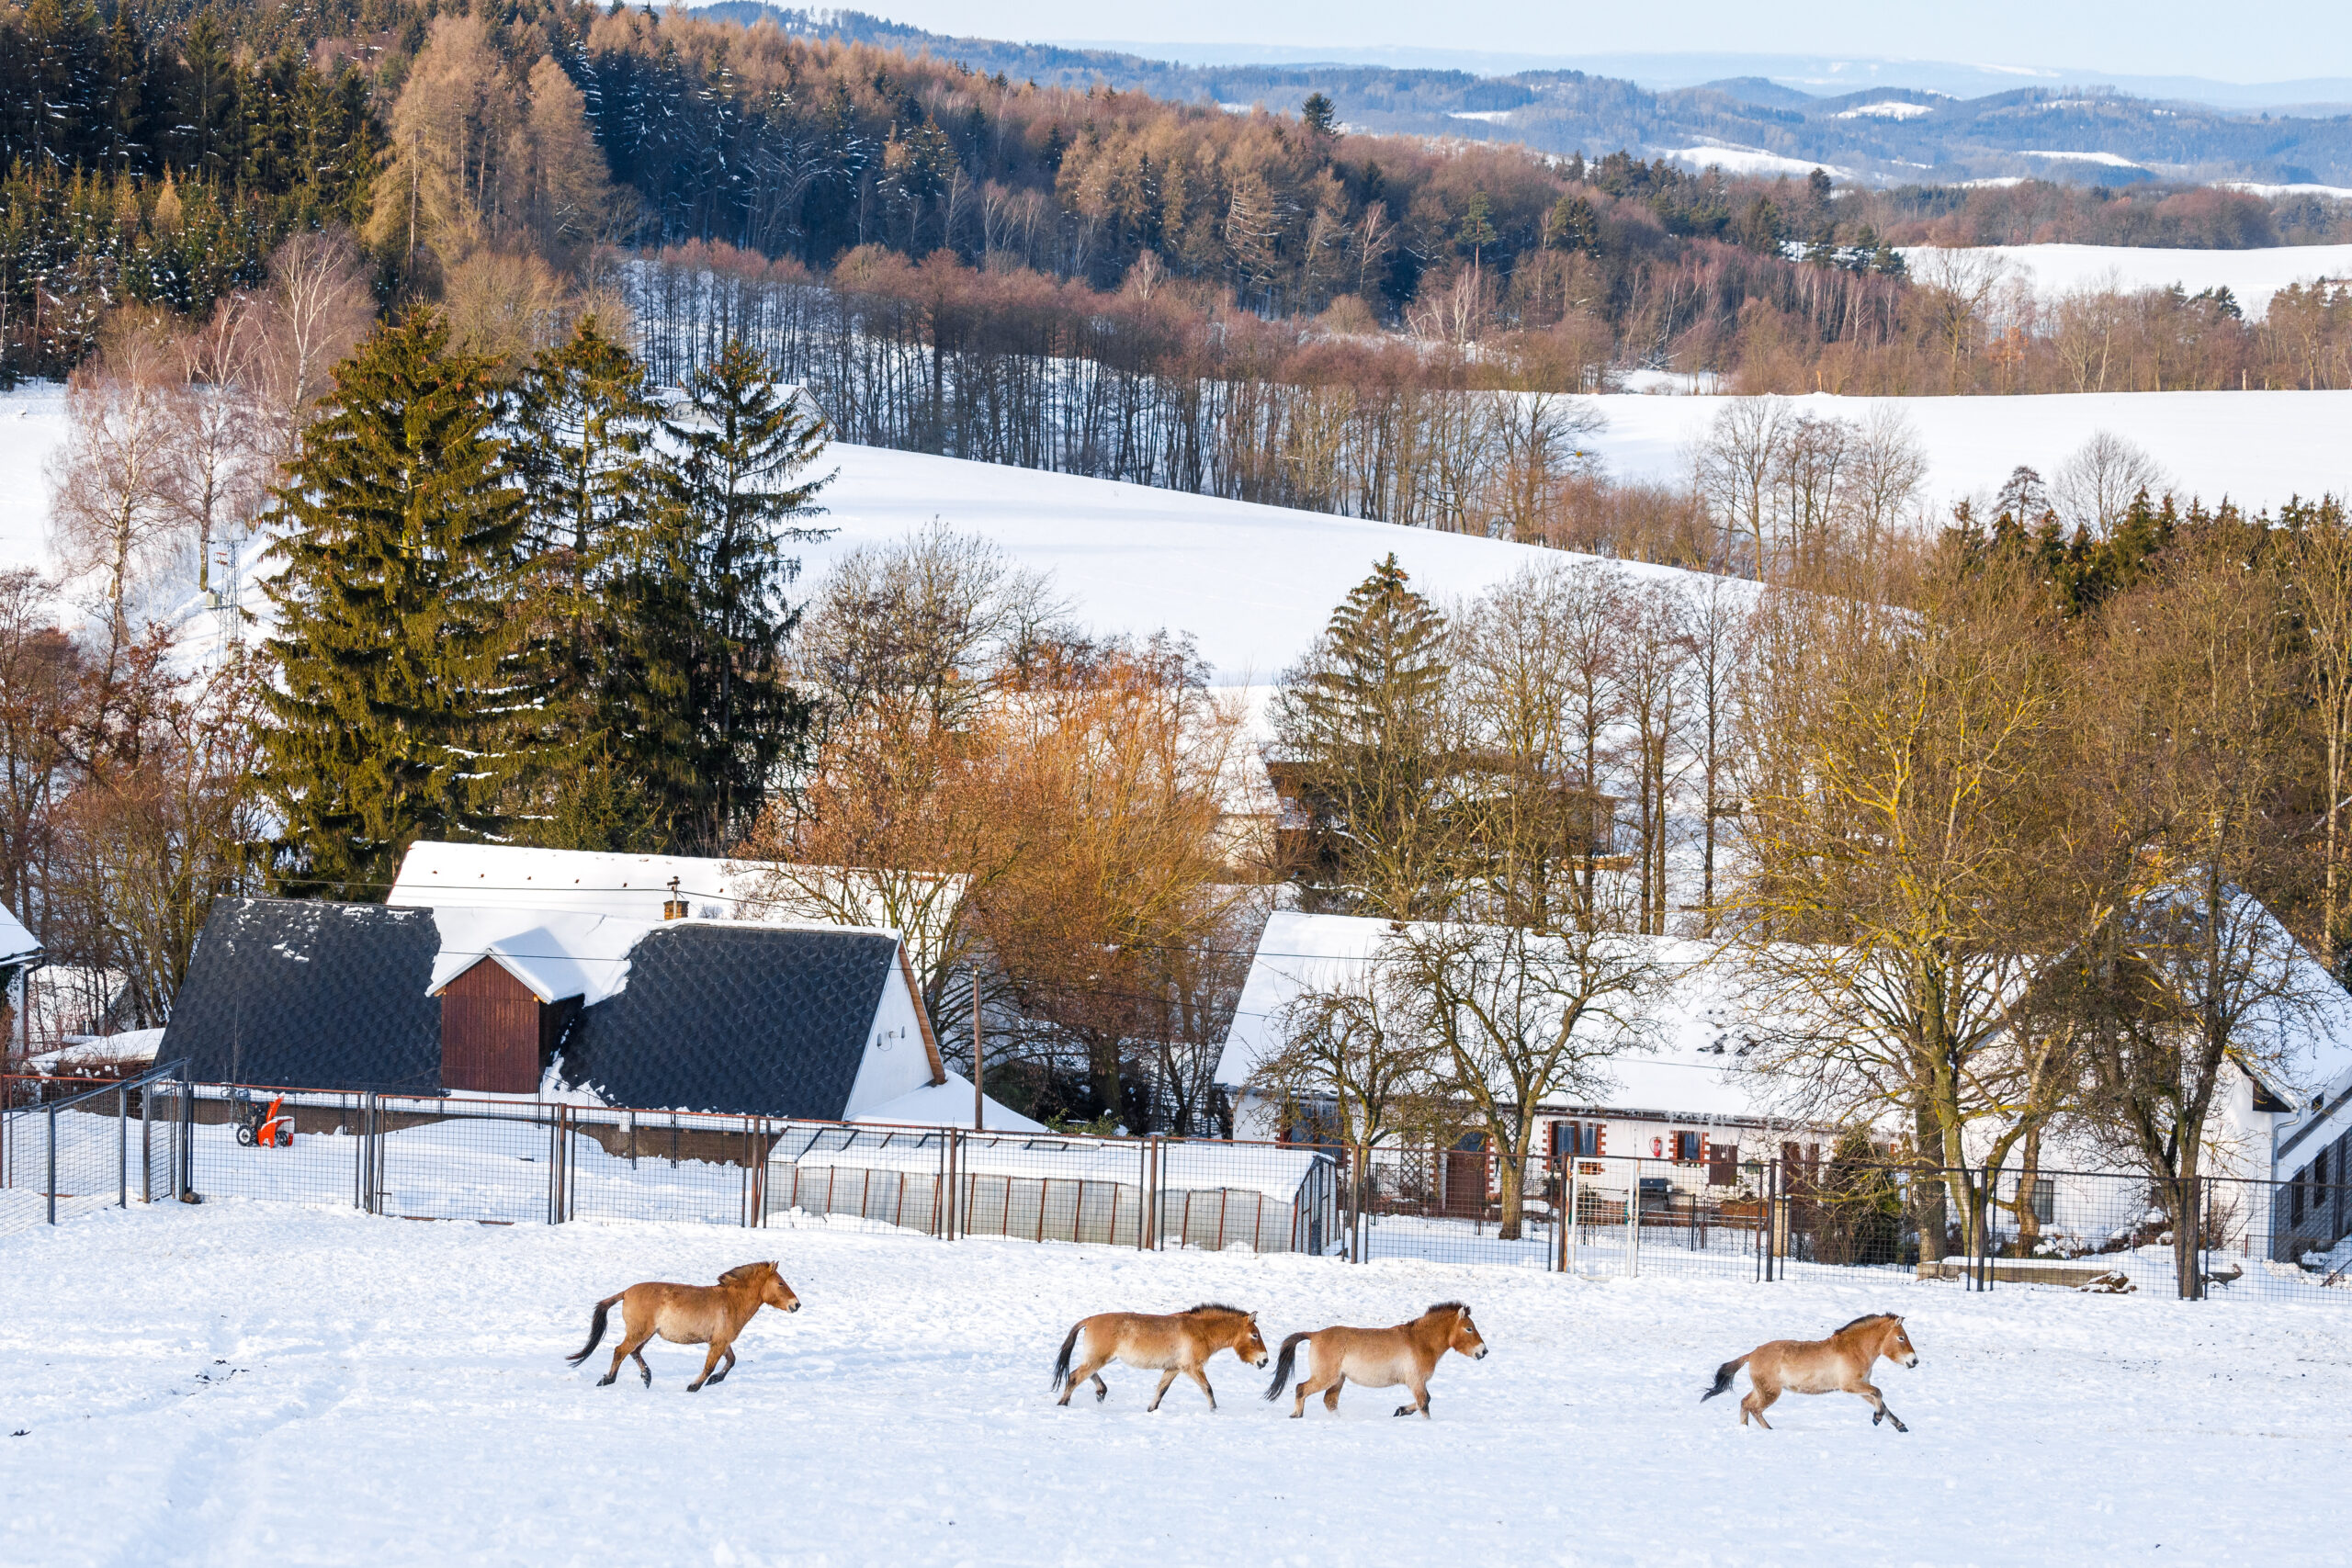 Przewalski's horses crossing a snowy, mountainous landscape in front of a series of low buildings